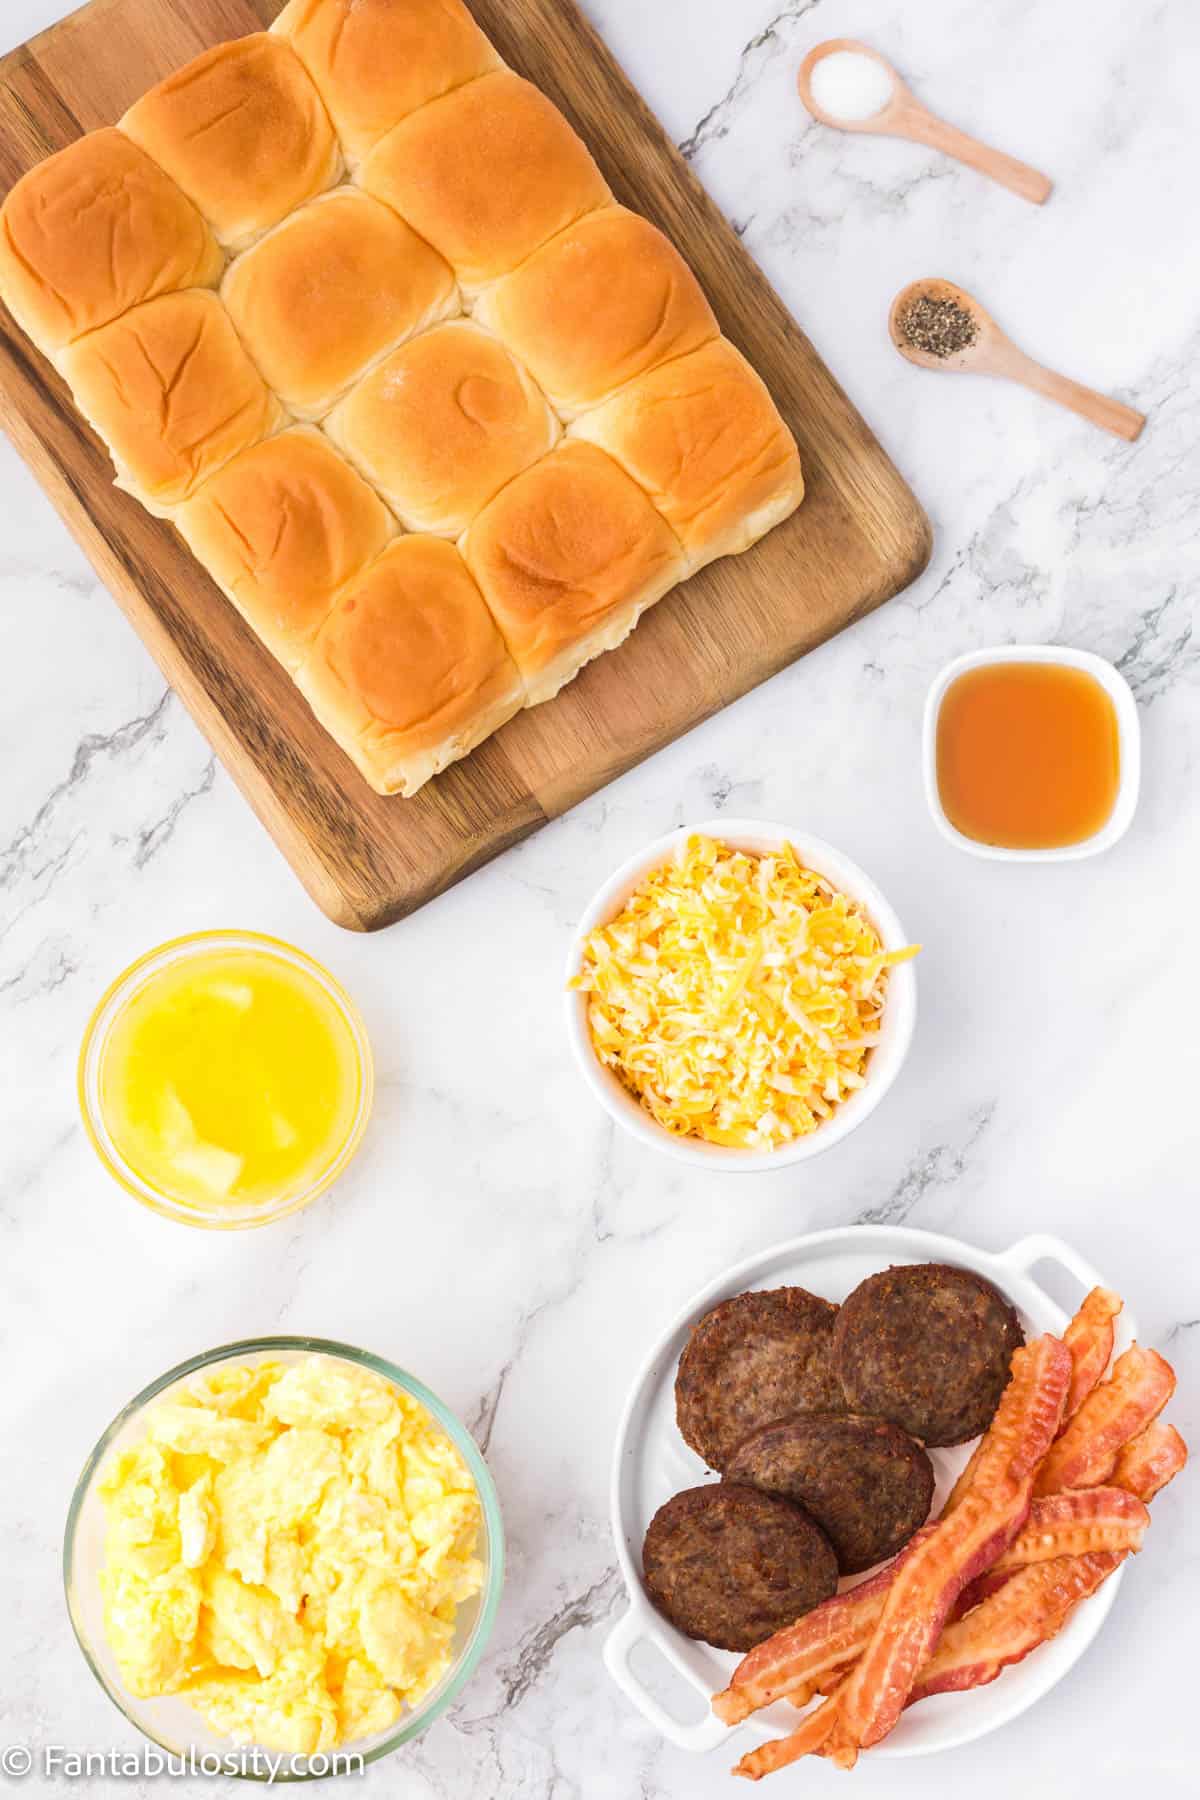 Hawaiian rolls, cooked bacon and sausage, scrambled eggs and shredded cheese are displayed on a white marble background